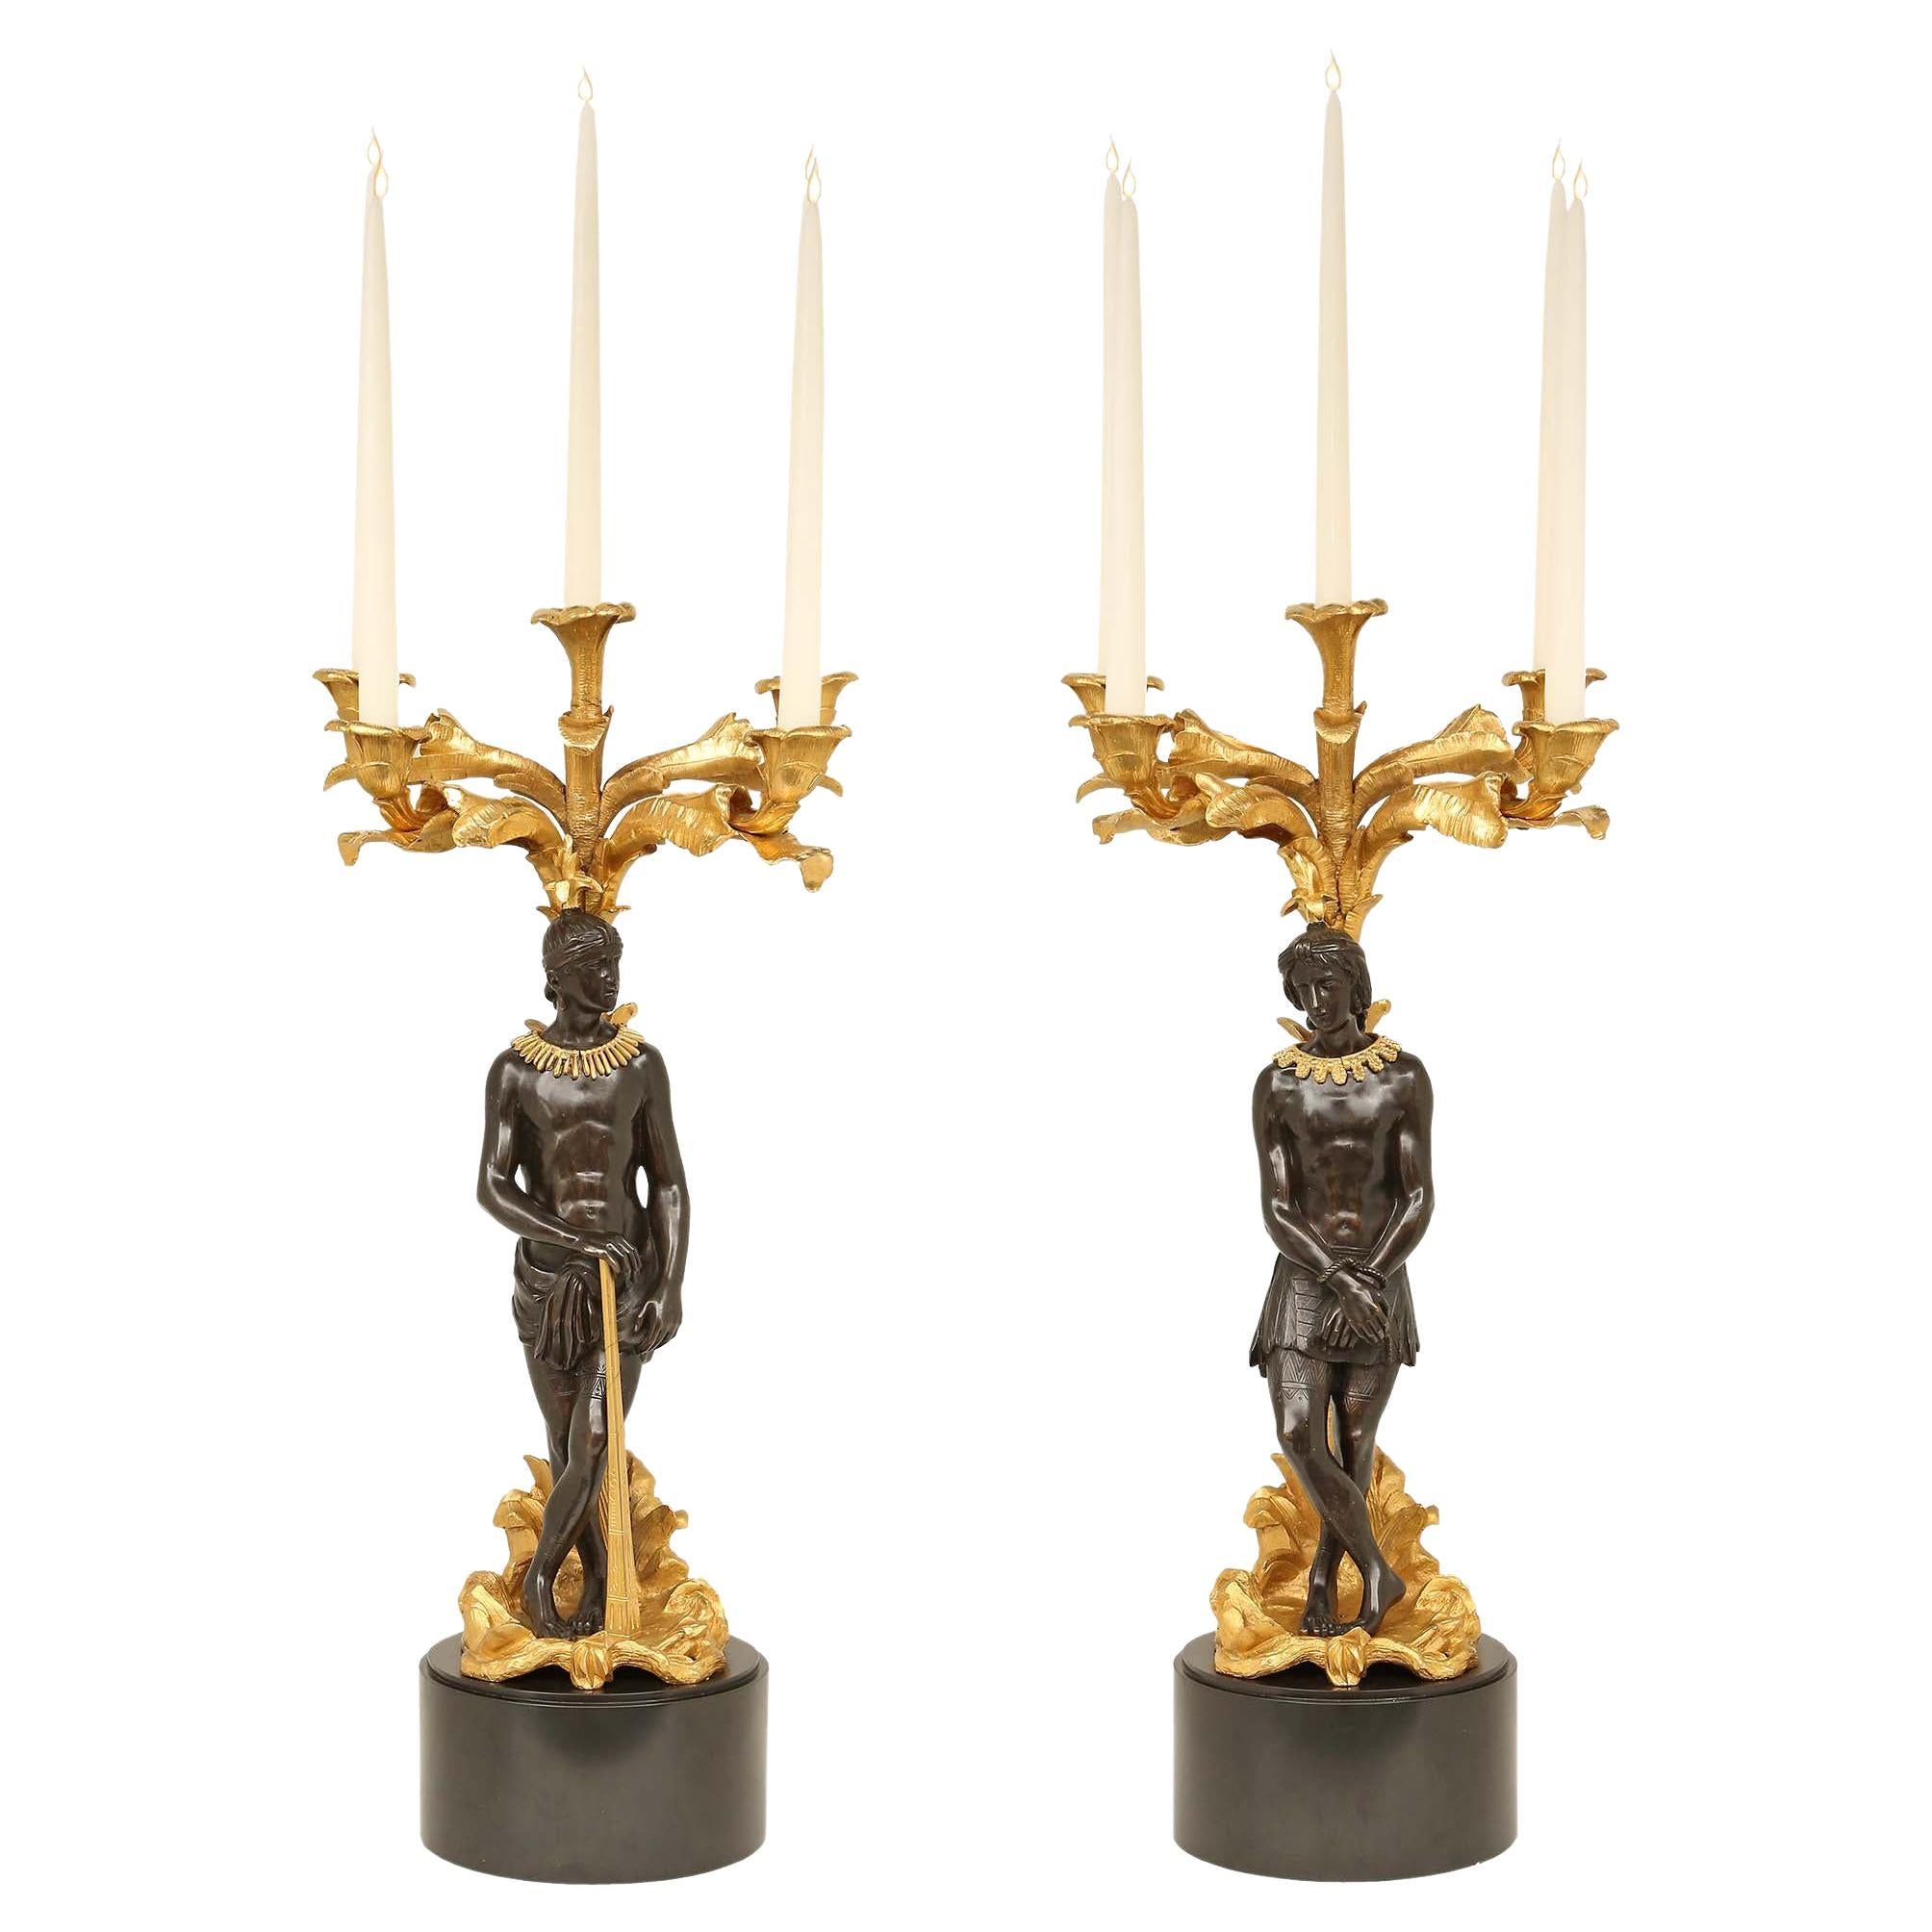 Pair of 19th Century Neoclassical St. Patinated Bronze and Ormolu Candelabras For Sale